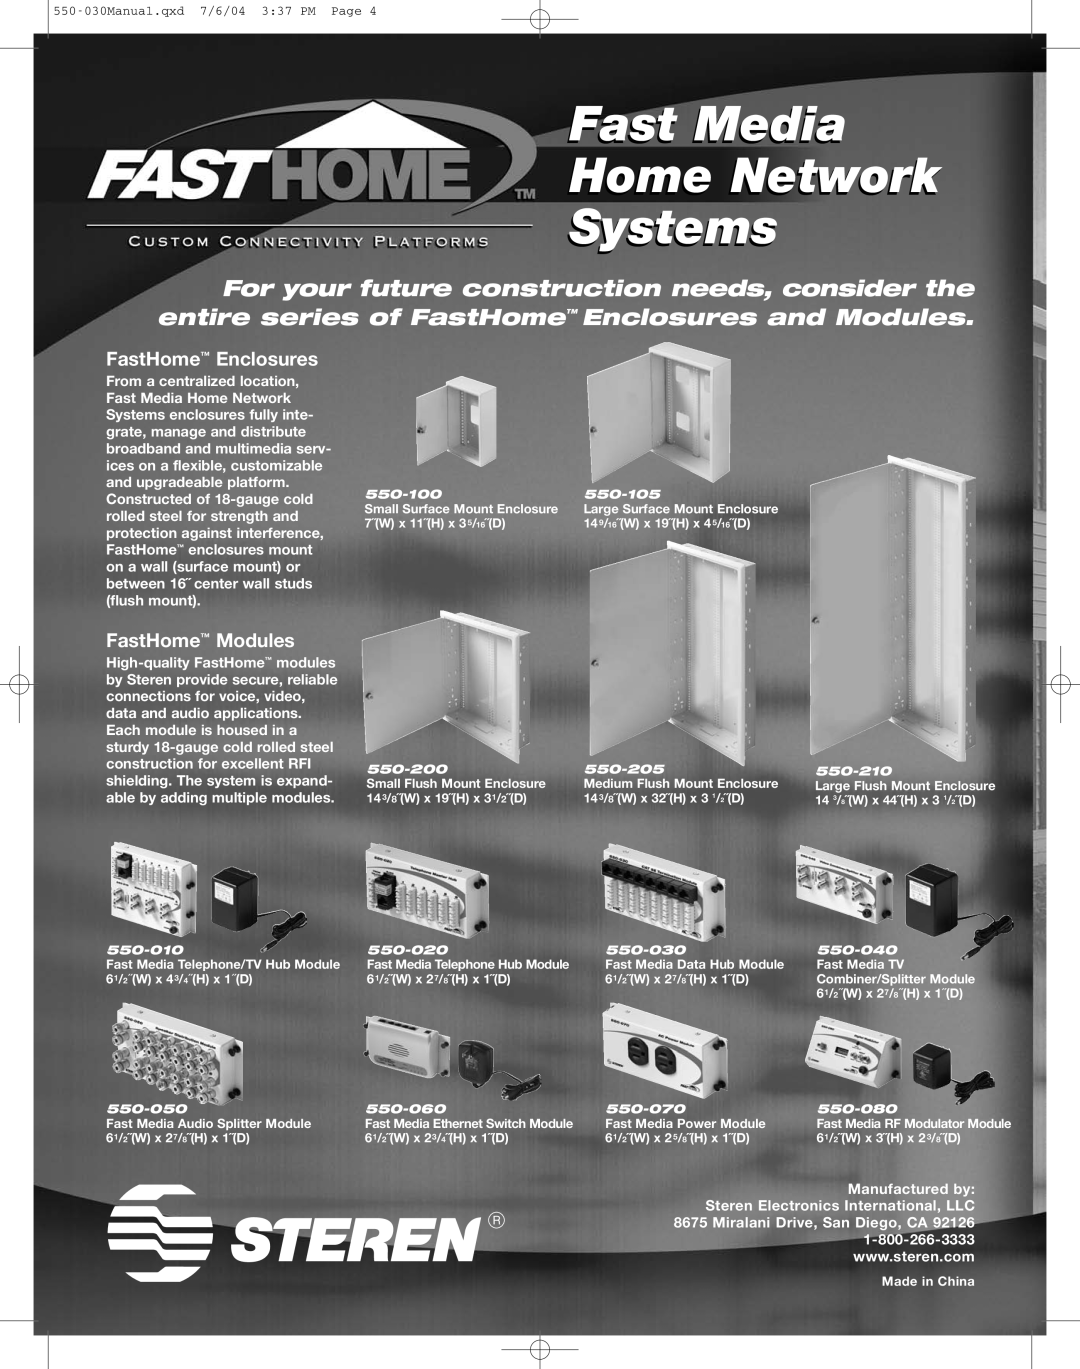 Steren 550-030 manual Fast Media Home Network Systems, FastHome Enclosures, FastHome Modules, Large Surface Mount Enclosure 